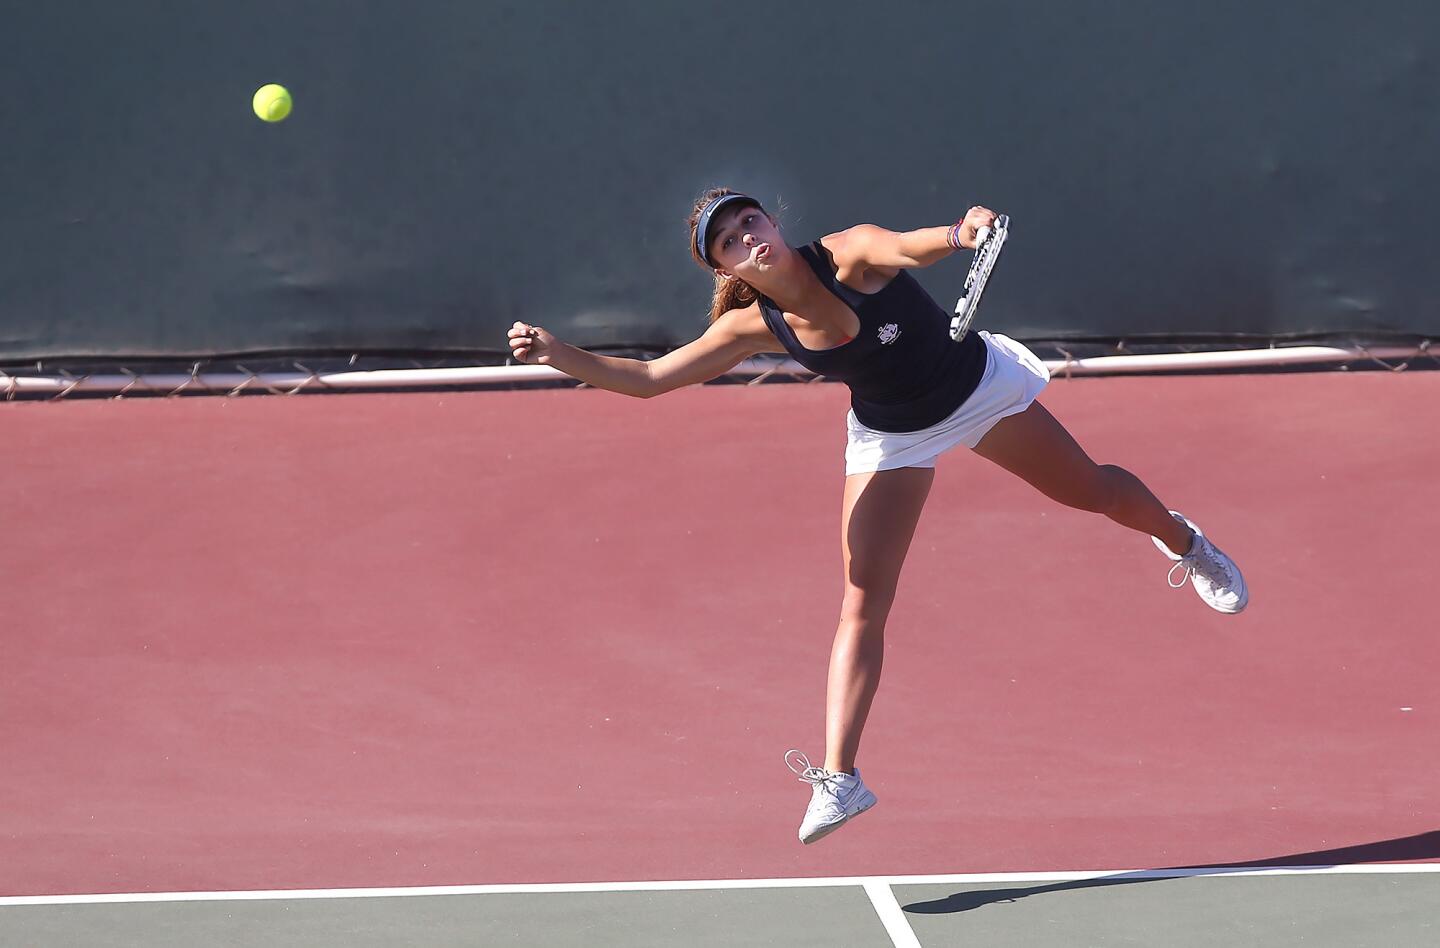 Newport Harbor doubles player Amra Barton serves during first round of the CIF Southern Section Division 1 playoffs against San Clemente on Wednesday